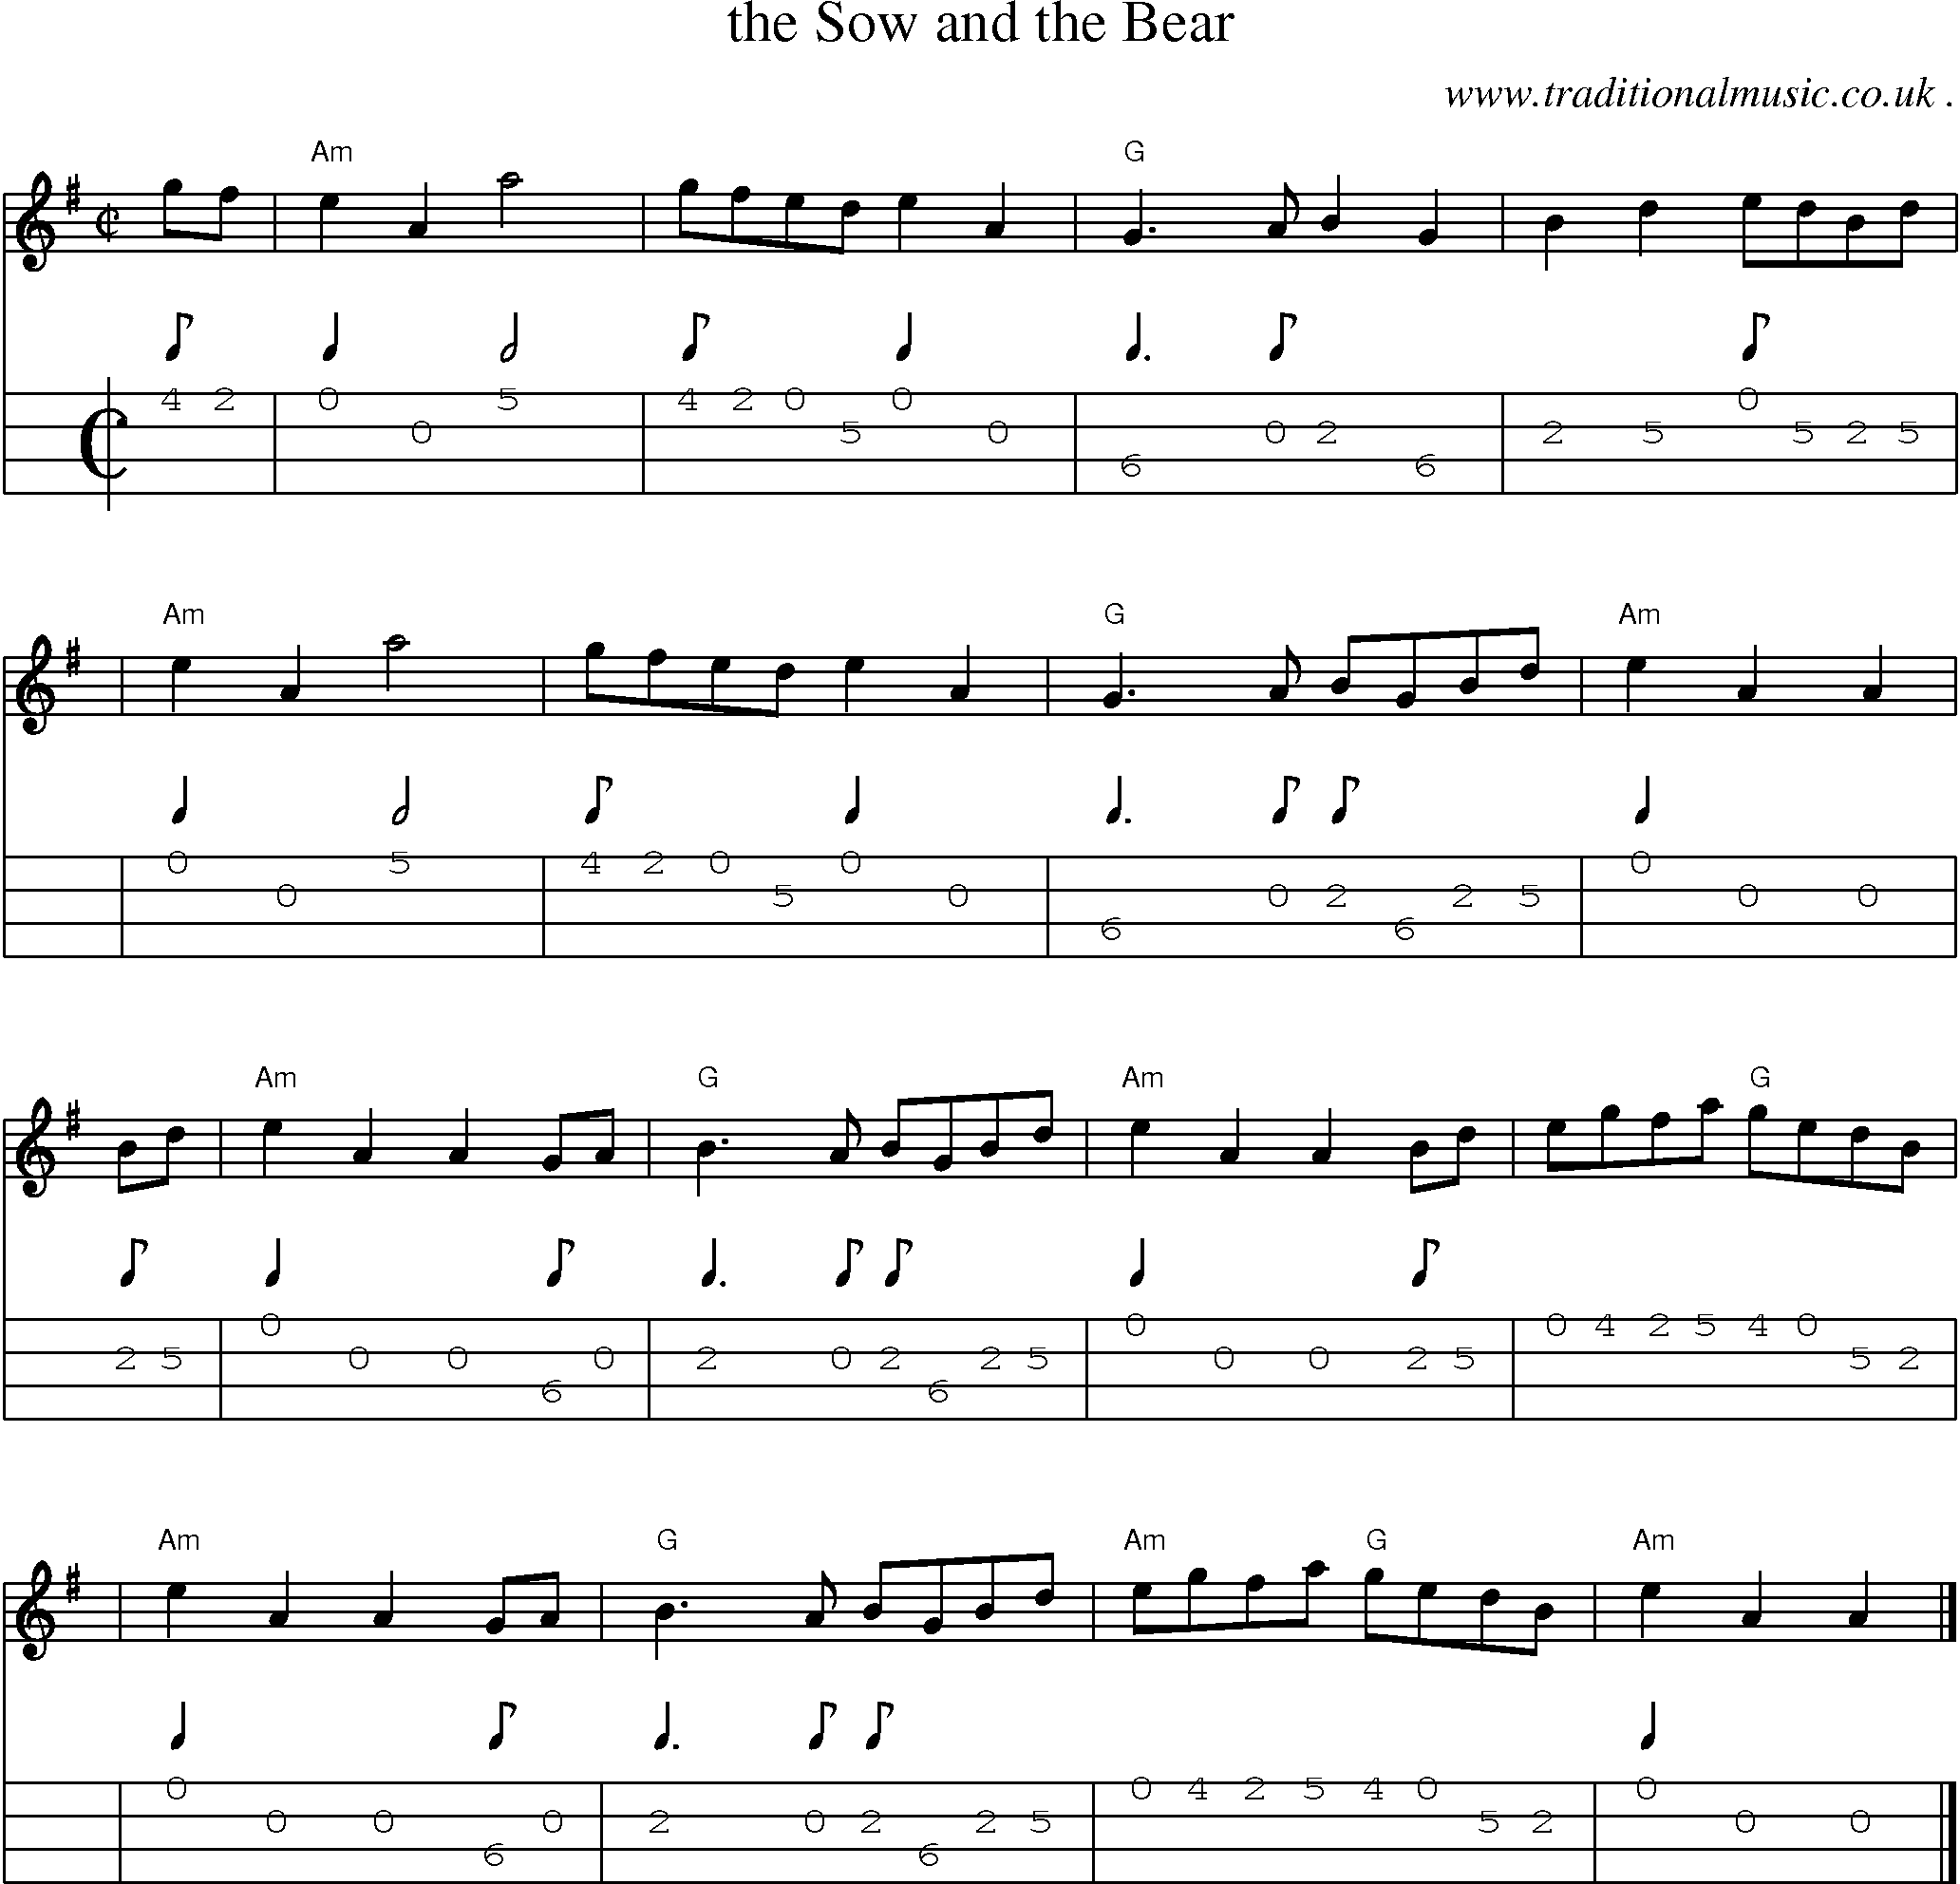 Sheet-music  score, Chords and Mandolin Tabs for The Sow And The Bear